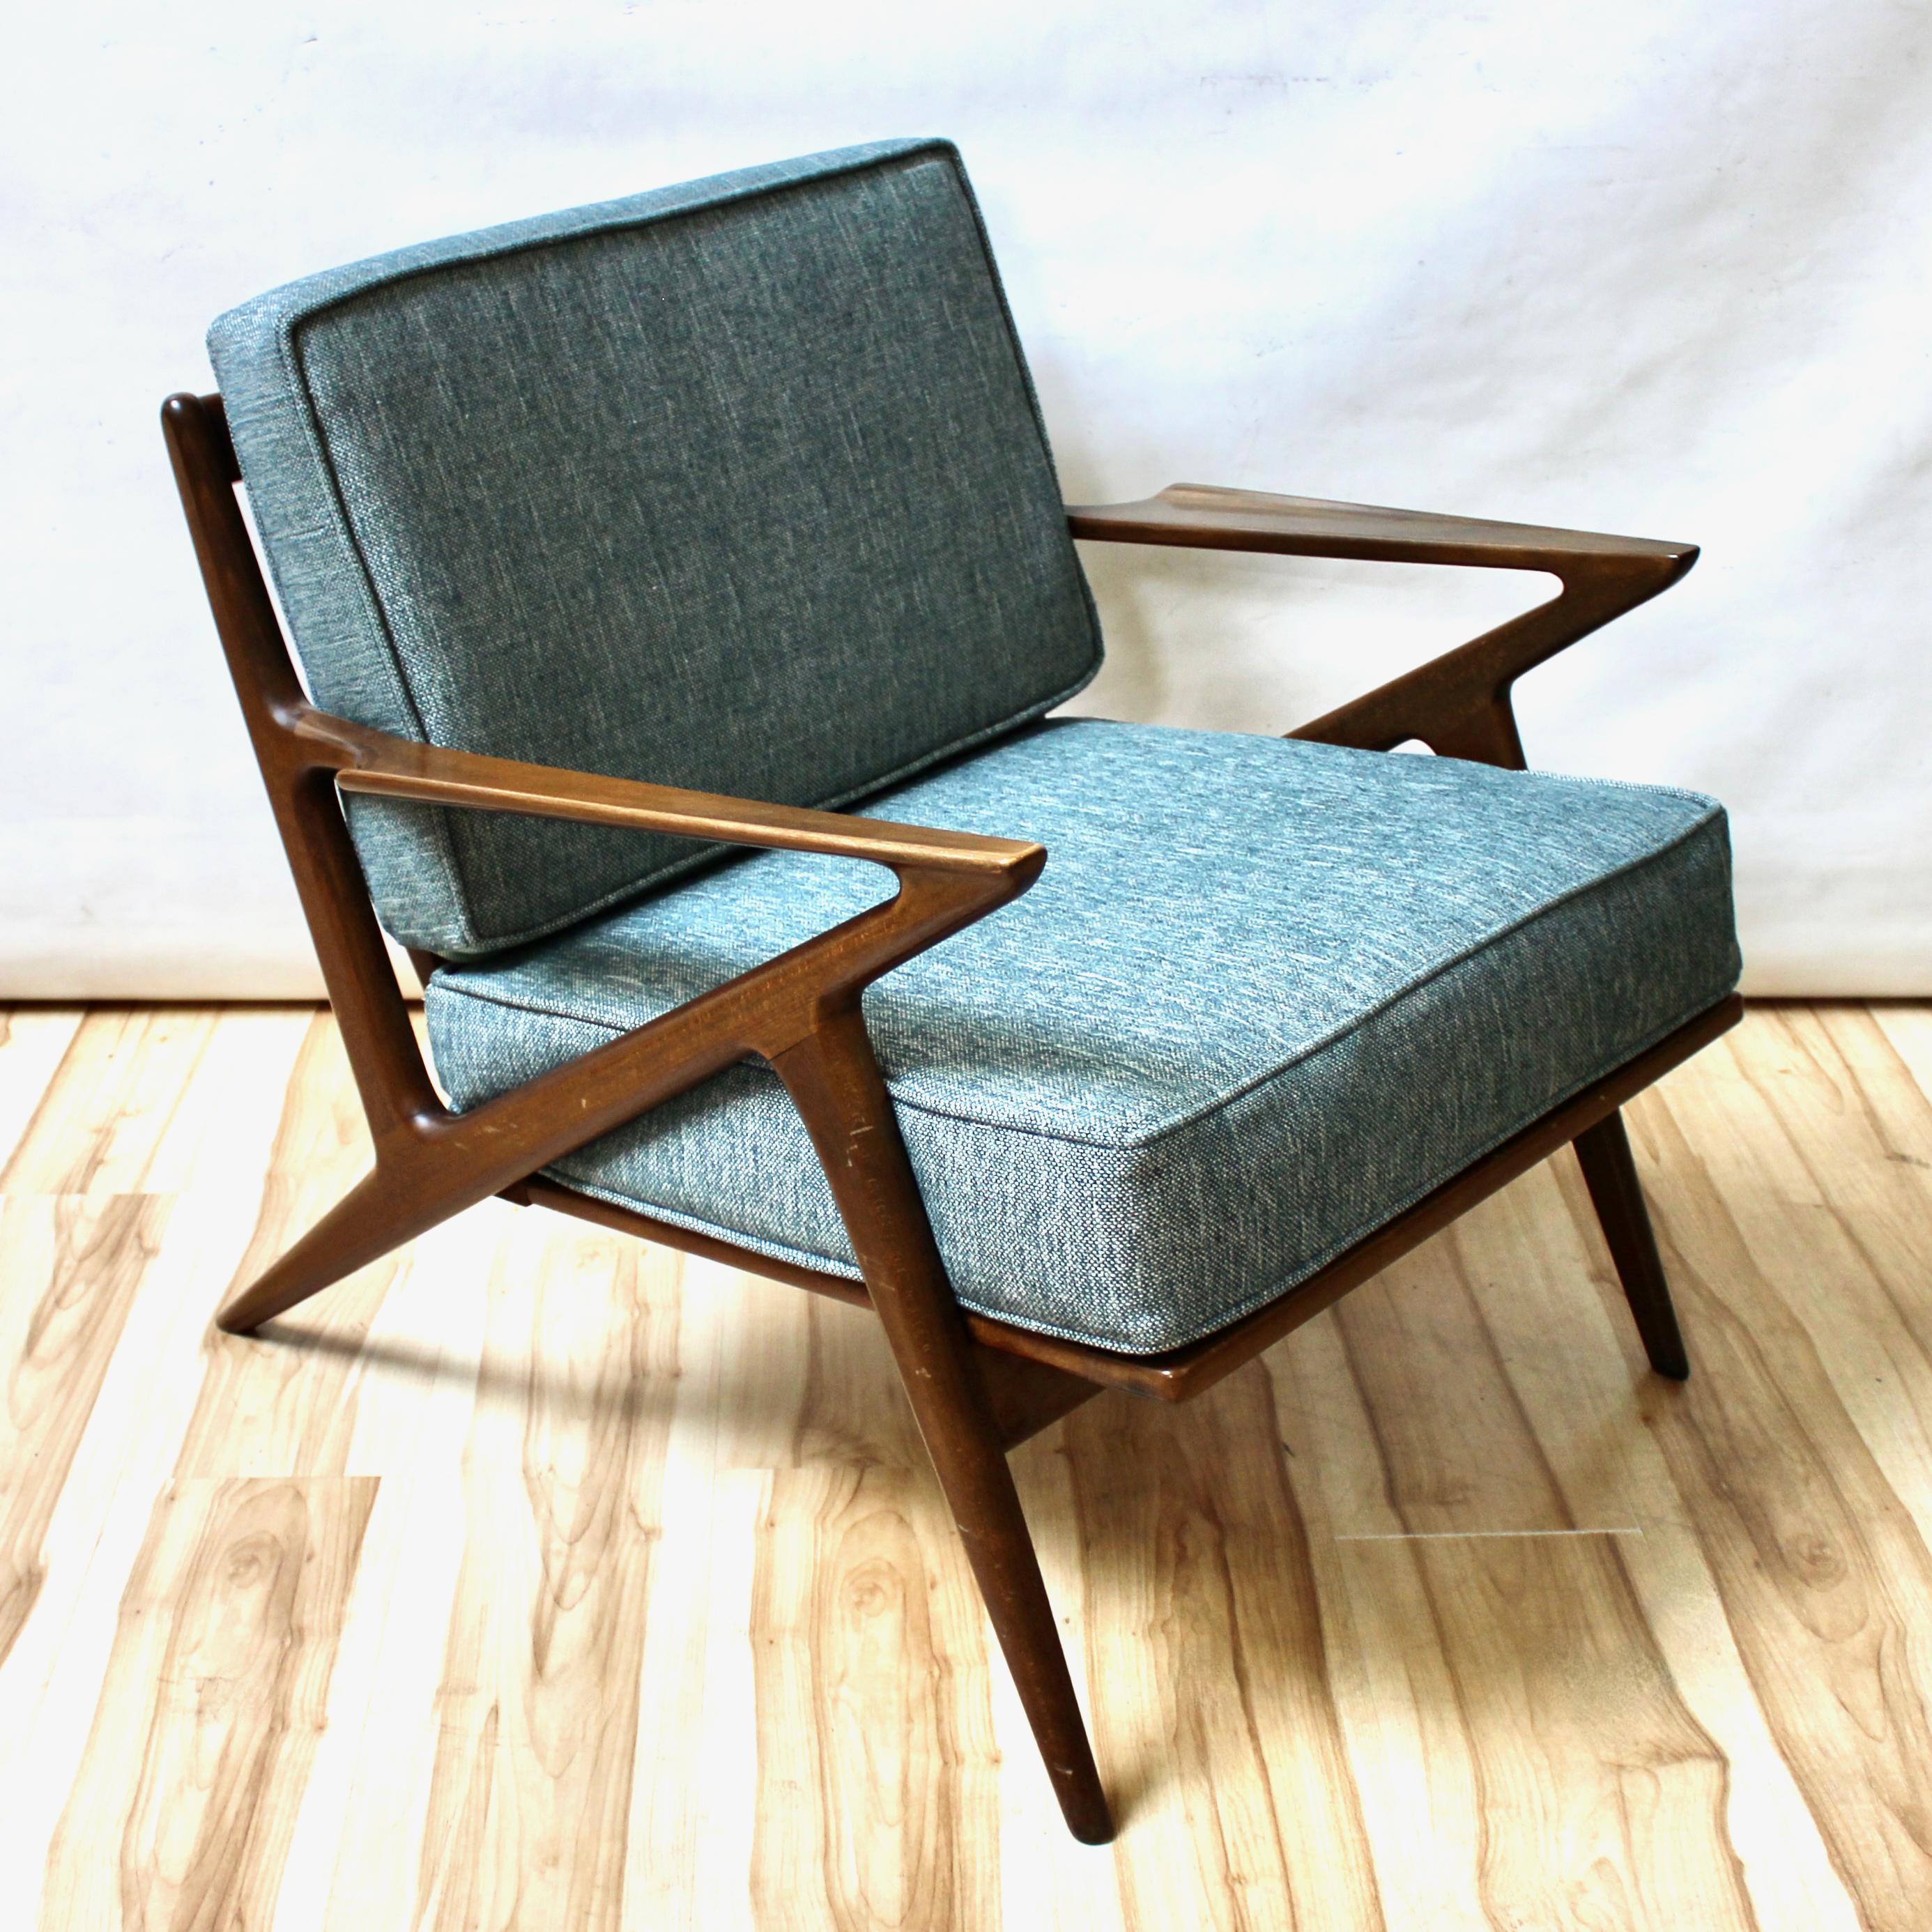 1957 Danish Modern Z lounge chair, designed by Poul Jensen for Selig. The chair has been professionally reupholstered with new material. In excellent vintage condition, with light wear, consistent with age and use.

Width: 29.5 in / Depth: 33 in /